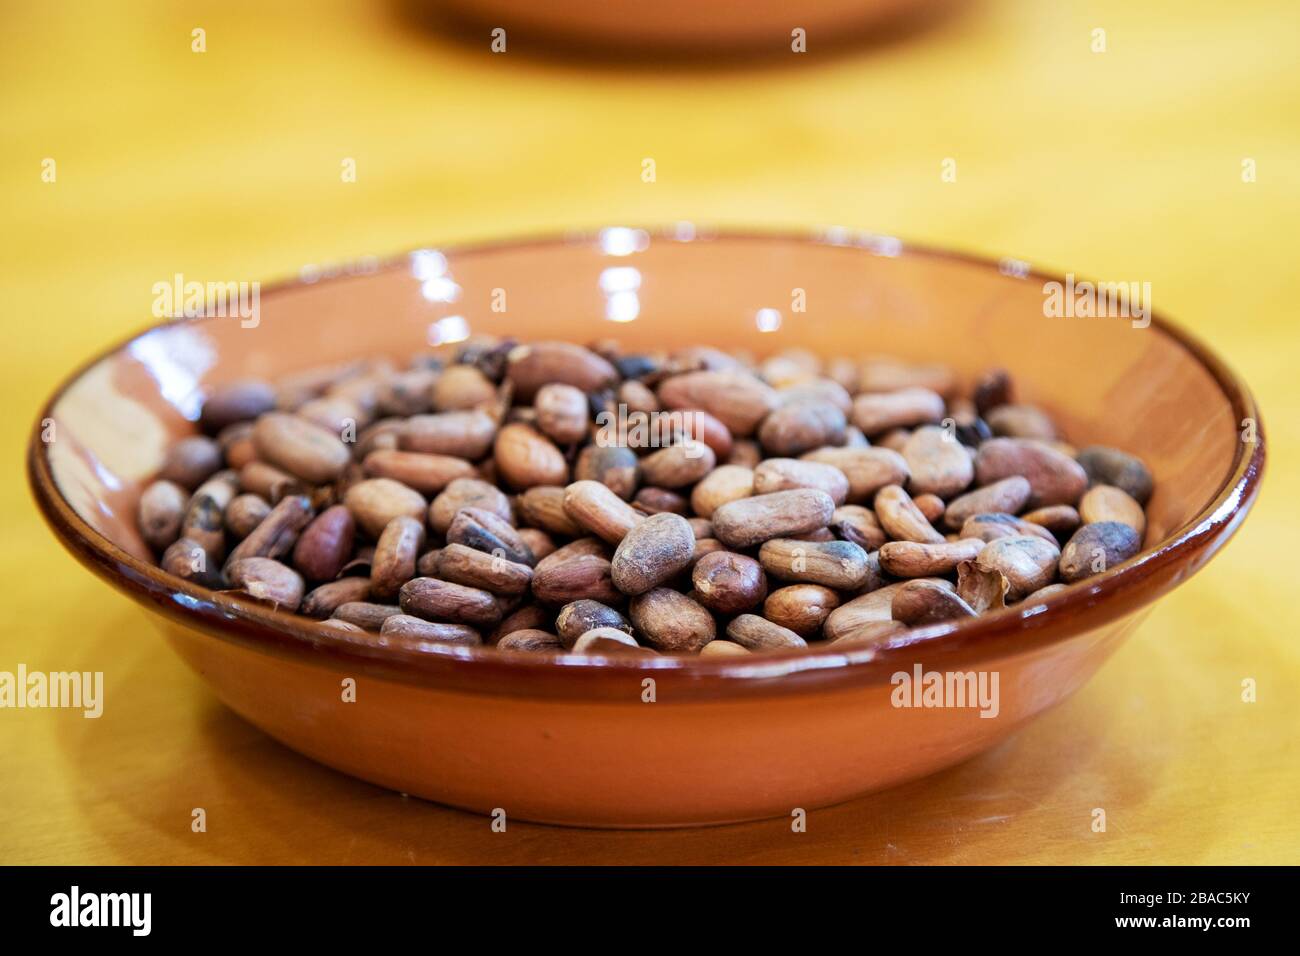 Bowl of Mexican cocoa beans, or cacao, ready to be ground into powder for making chocolate. Stock Photo